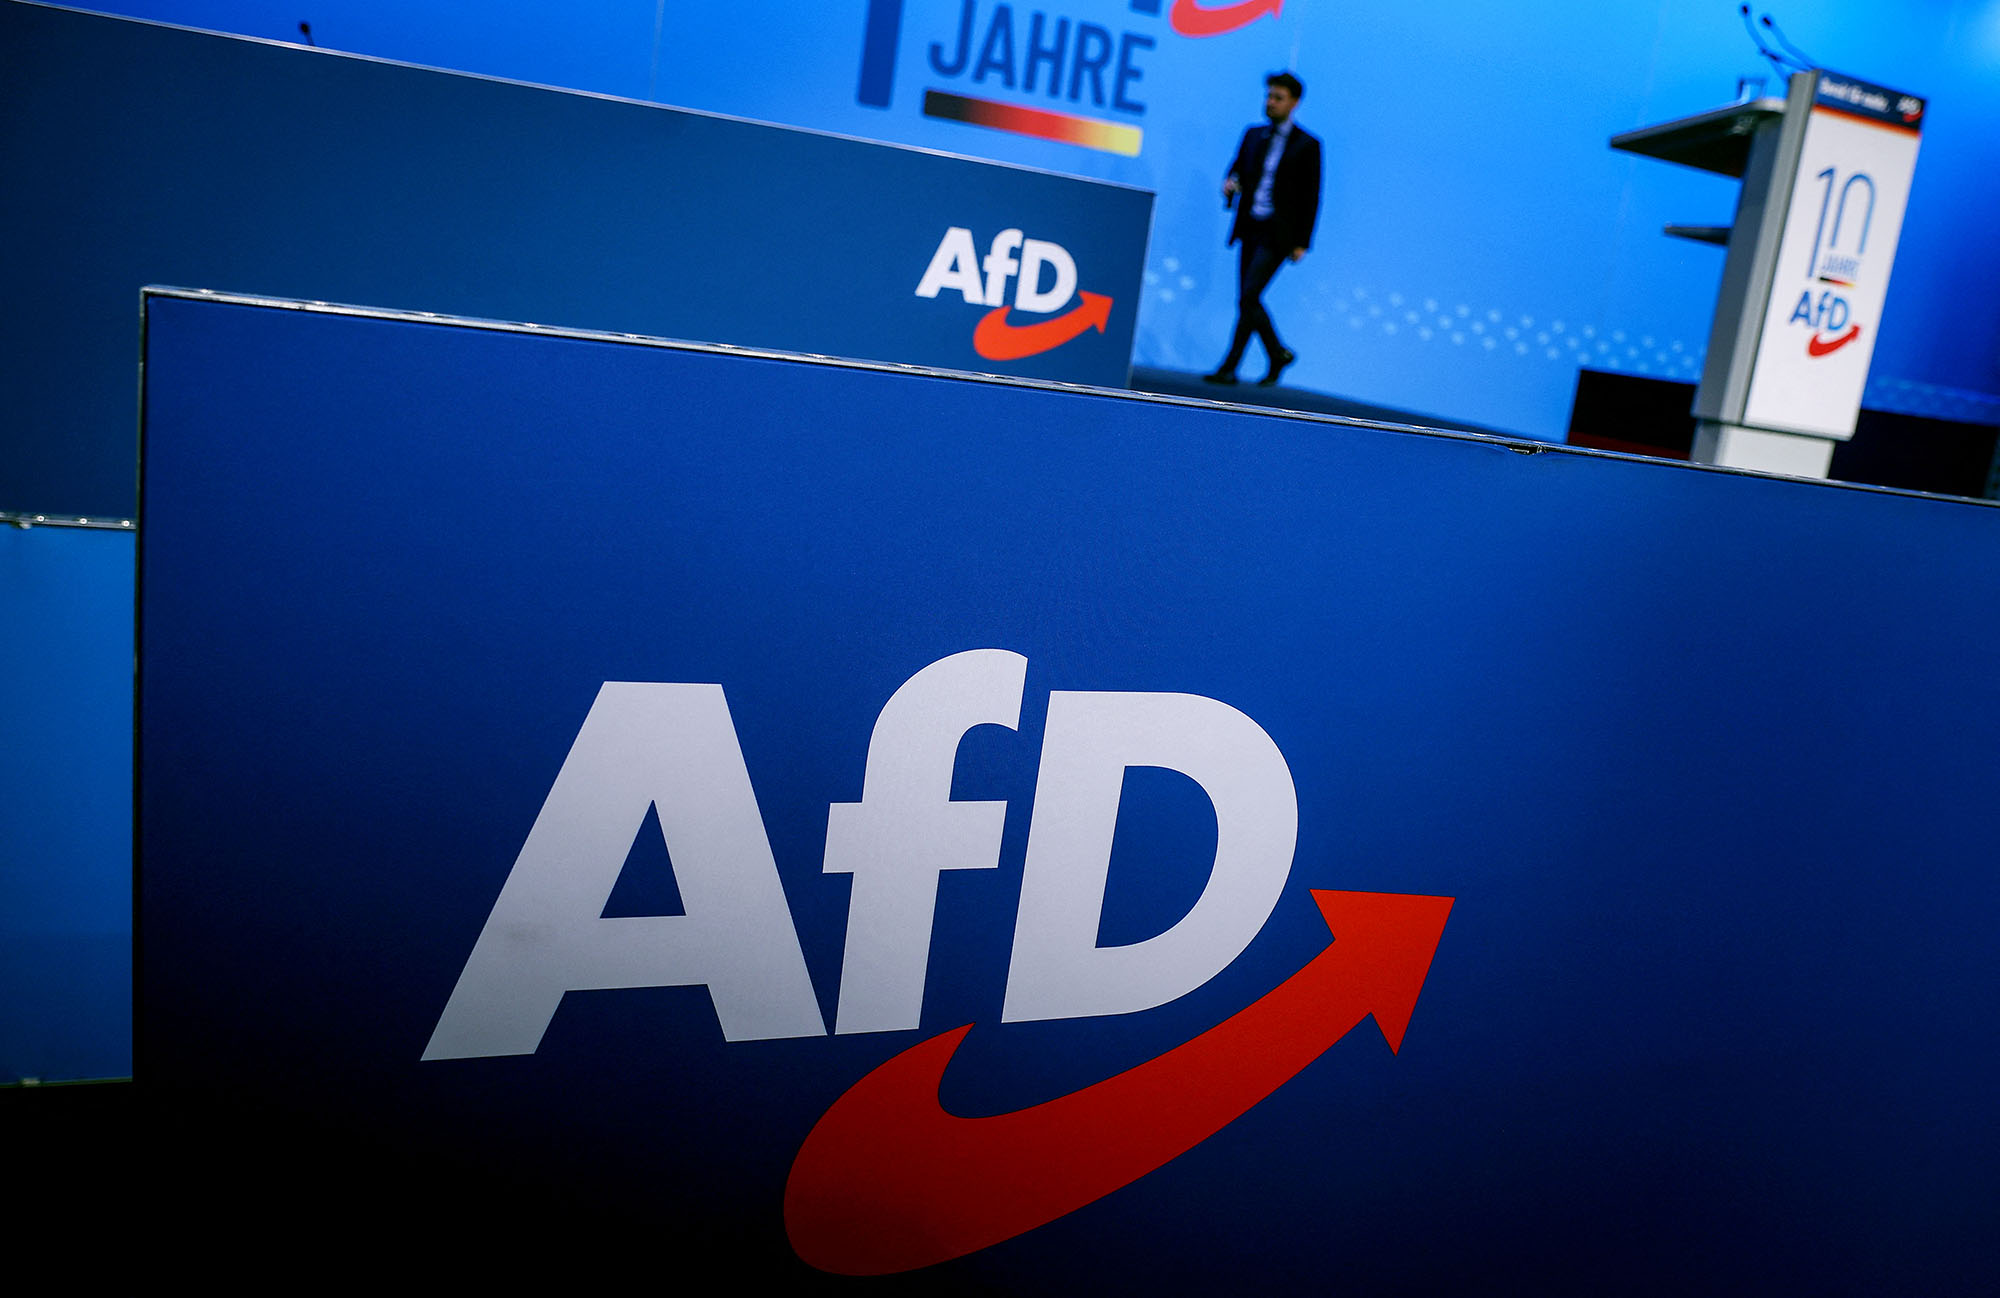 The AfD remains the second-strongest political force in Germany.